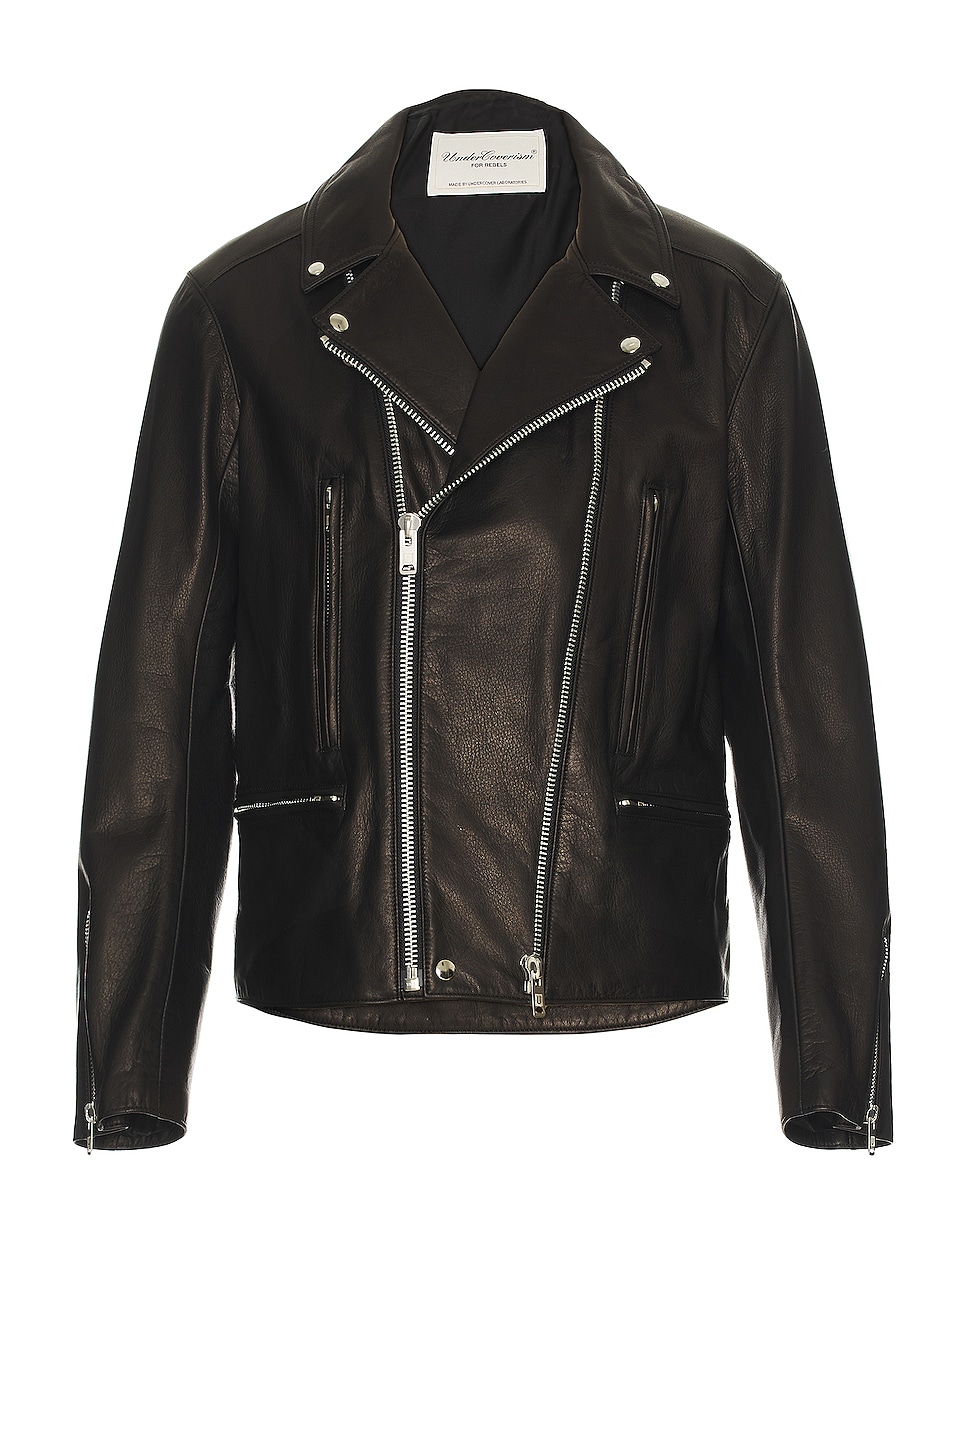 Image 1 of Undercover Leather Double Rider Jacket in Black